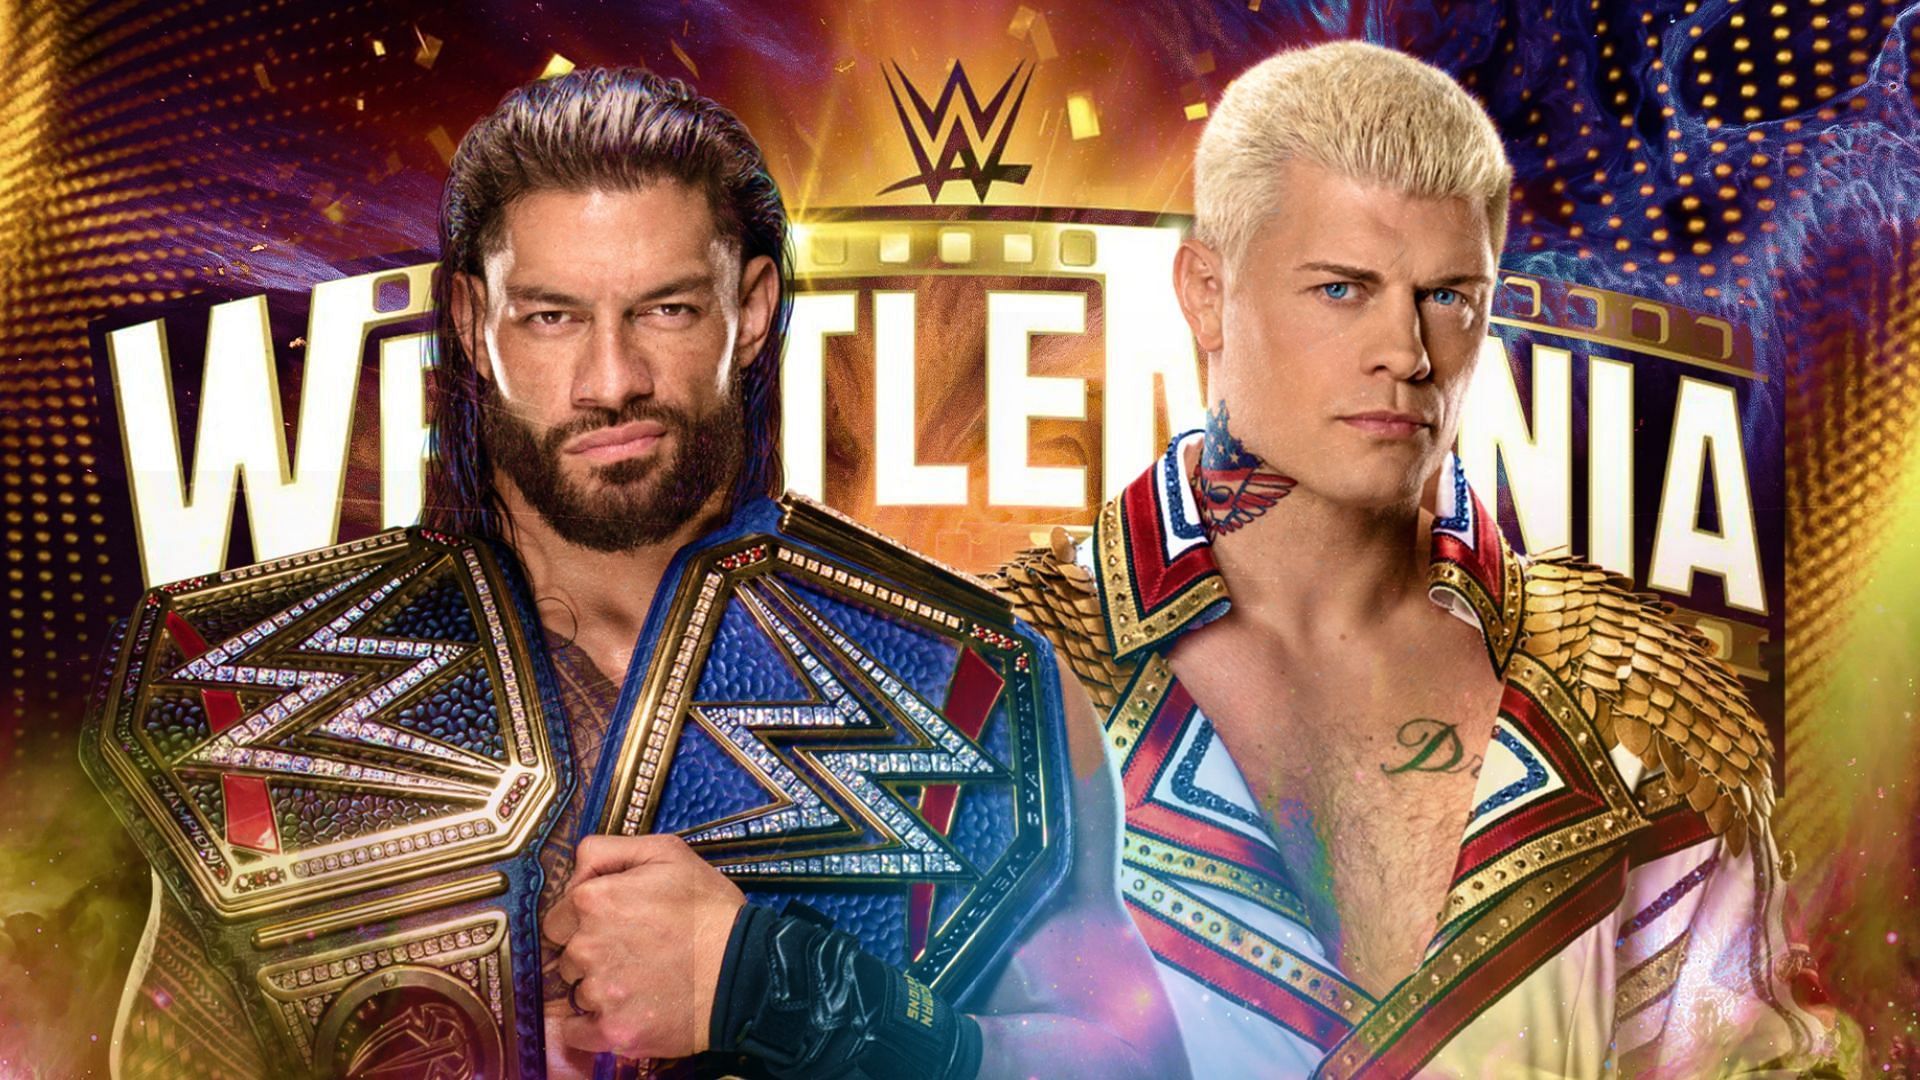 Cody Rhodes versus Roman Reigns is a match the WWE Universe wants to see in Hollywood